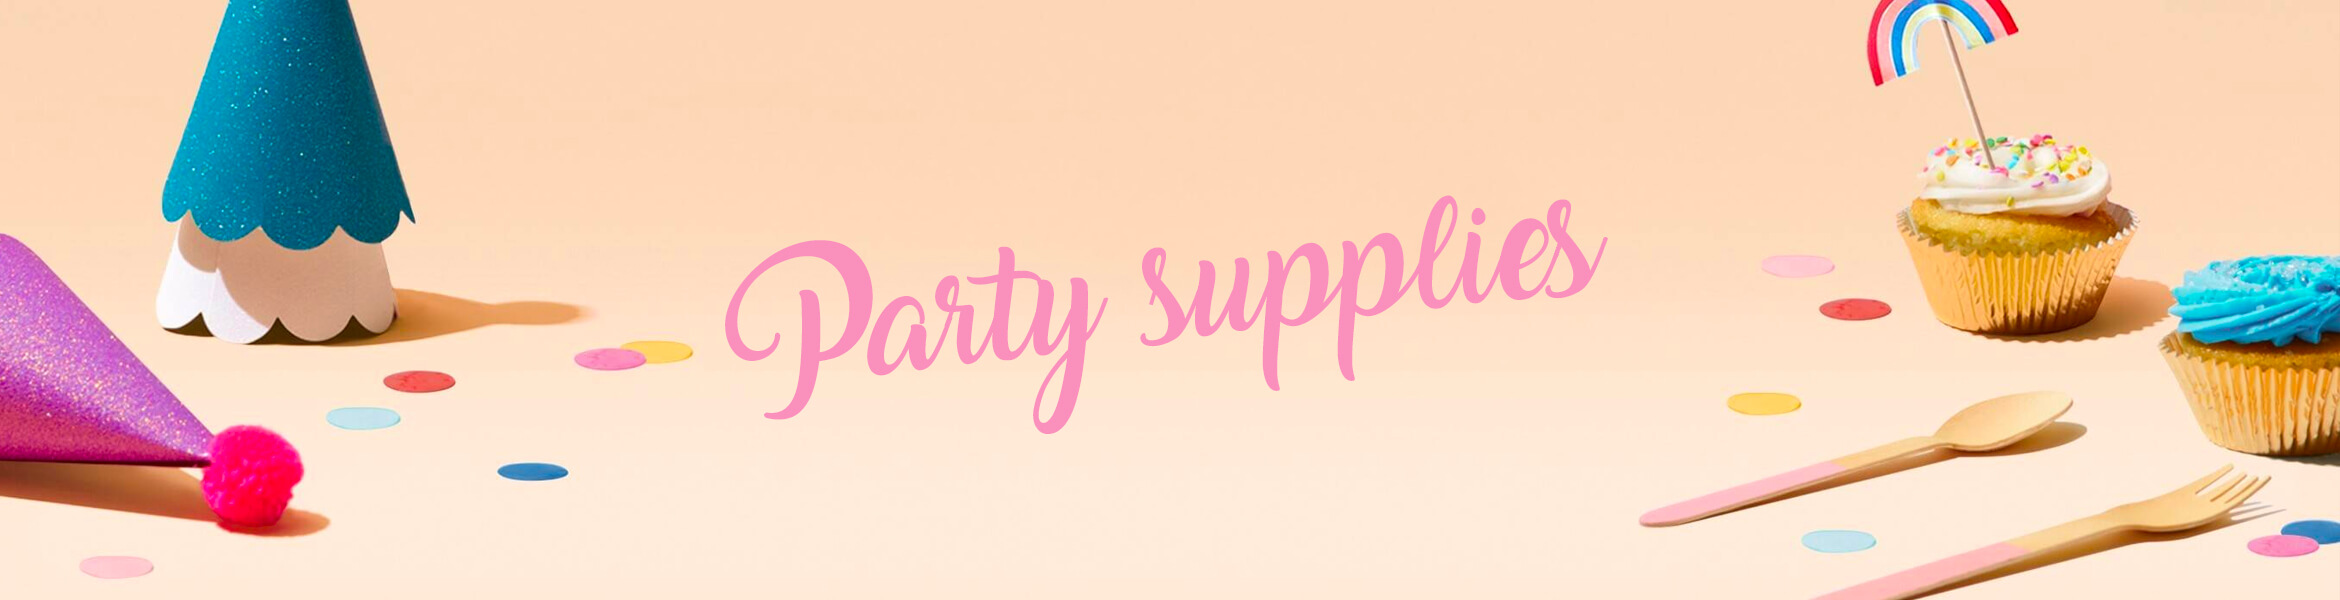 Party supplies for any occasions